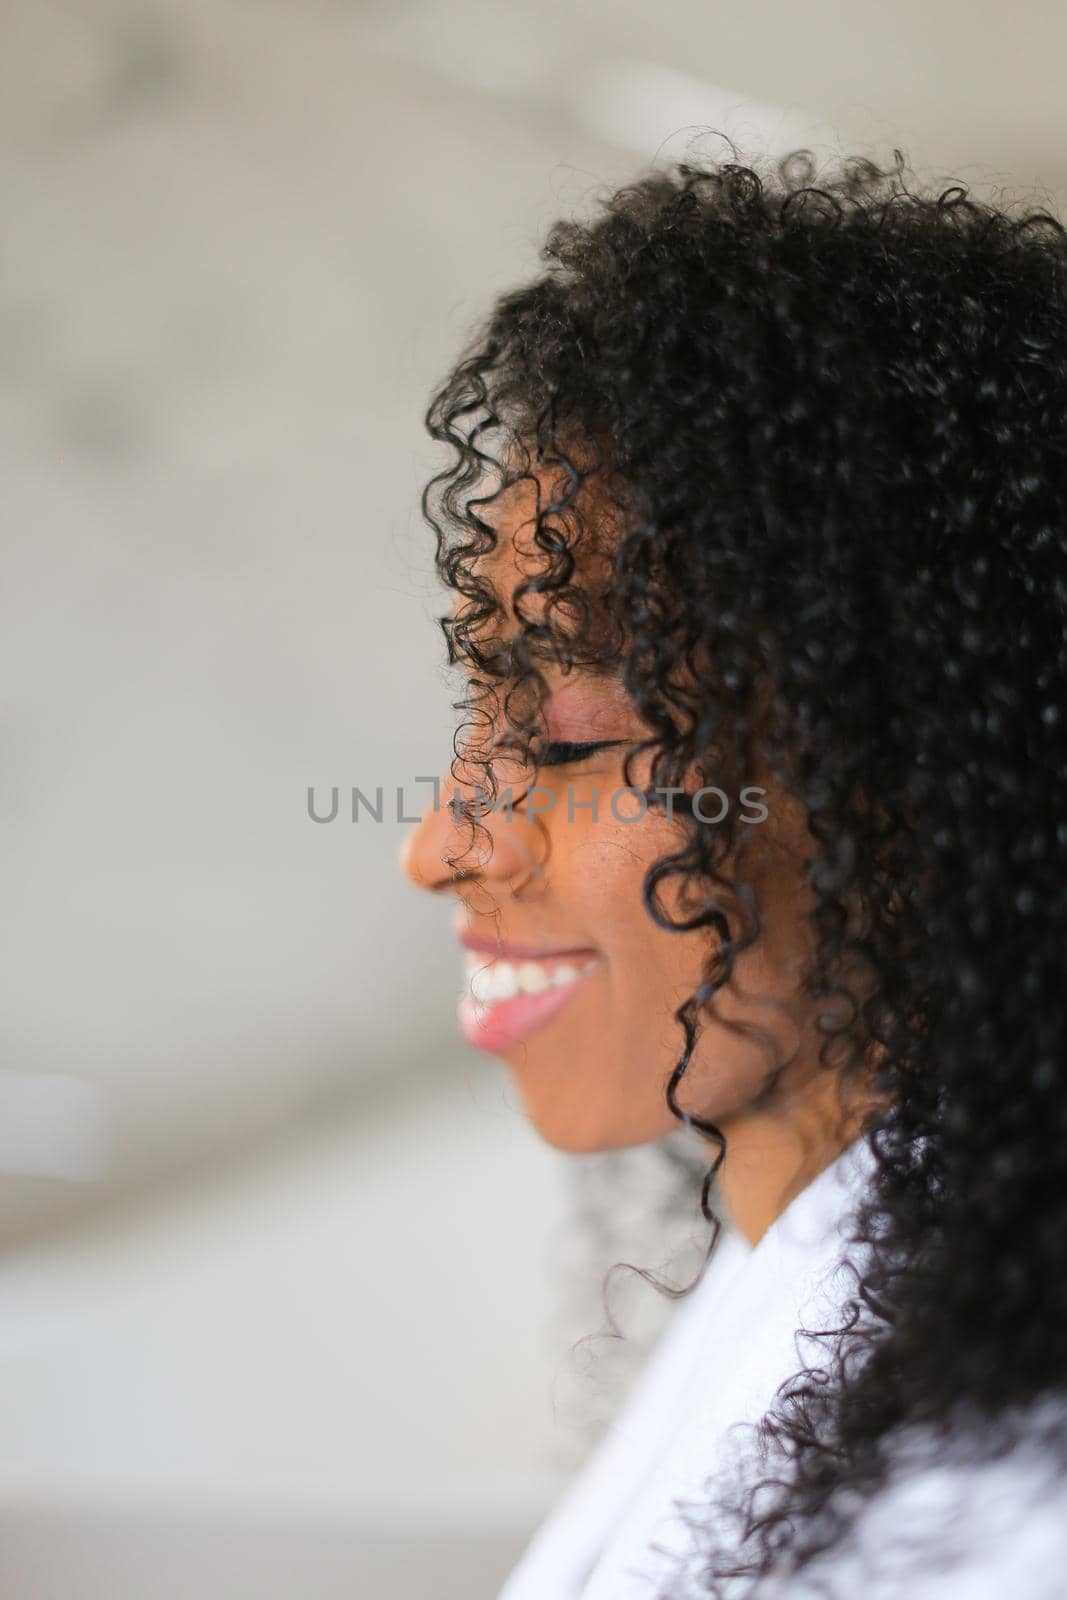 Portrait of smiling black curly haired girl. by sisterspro